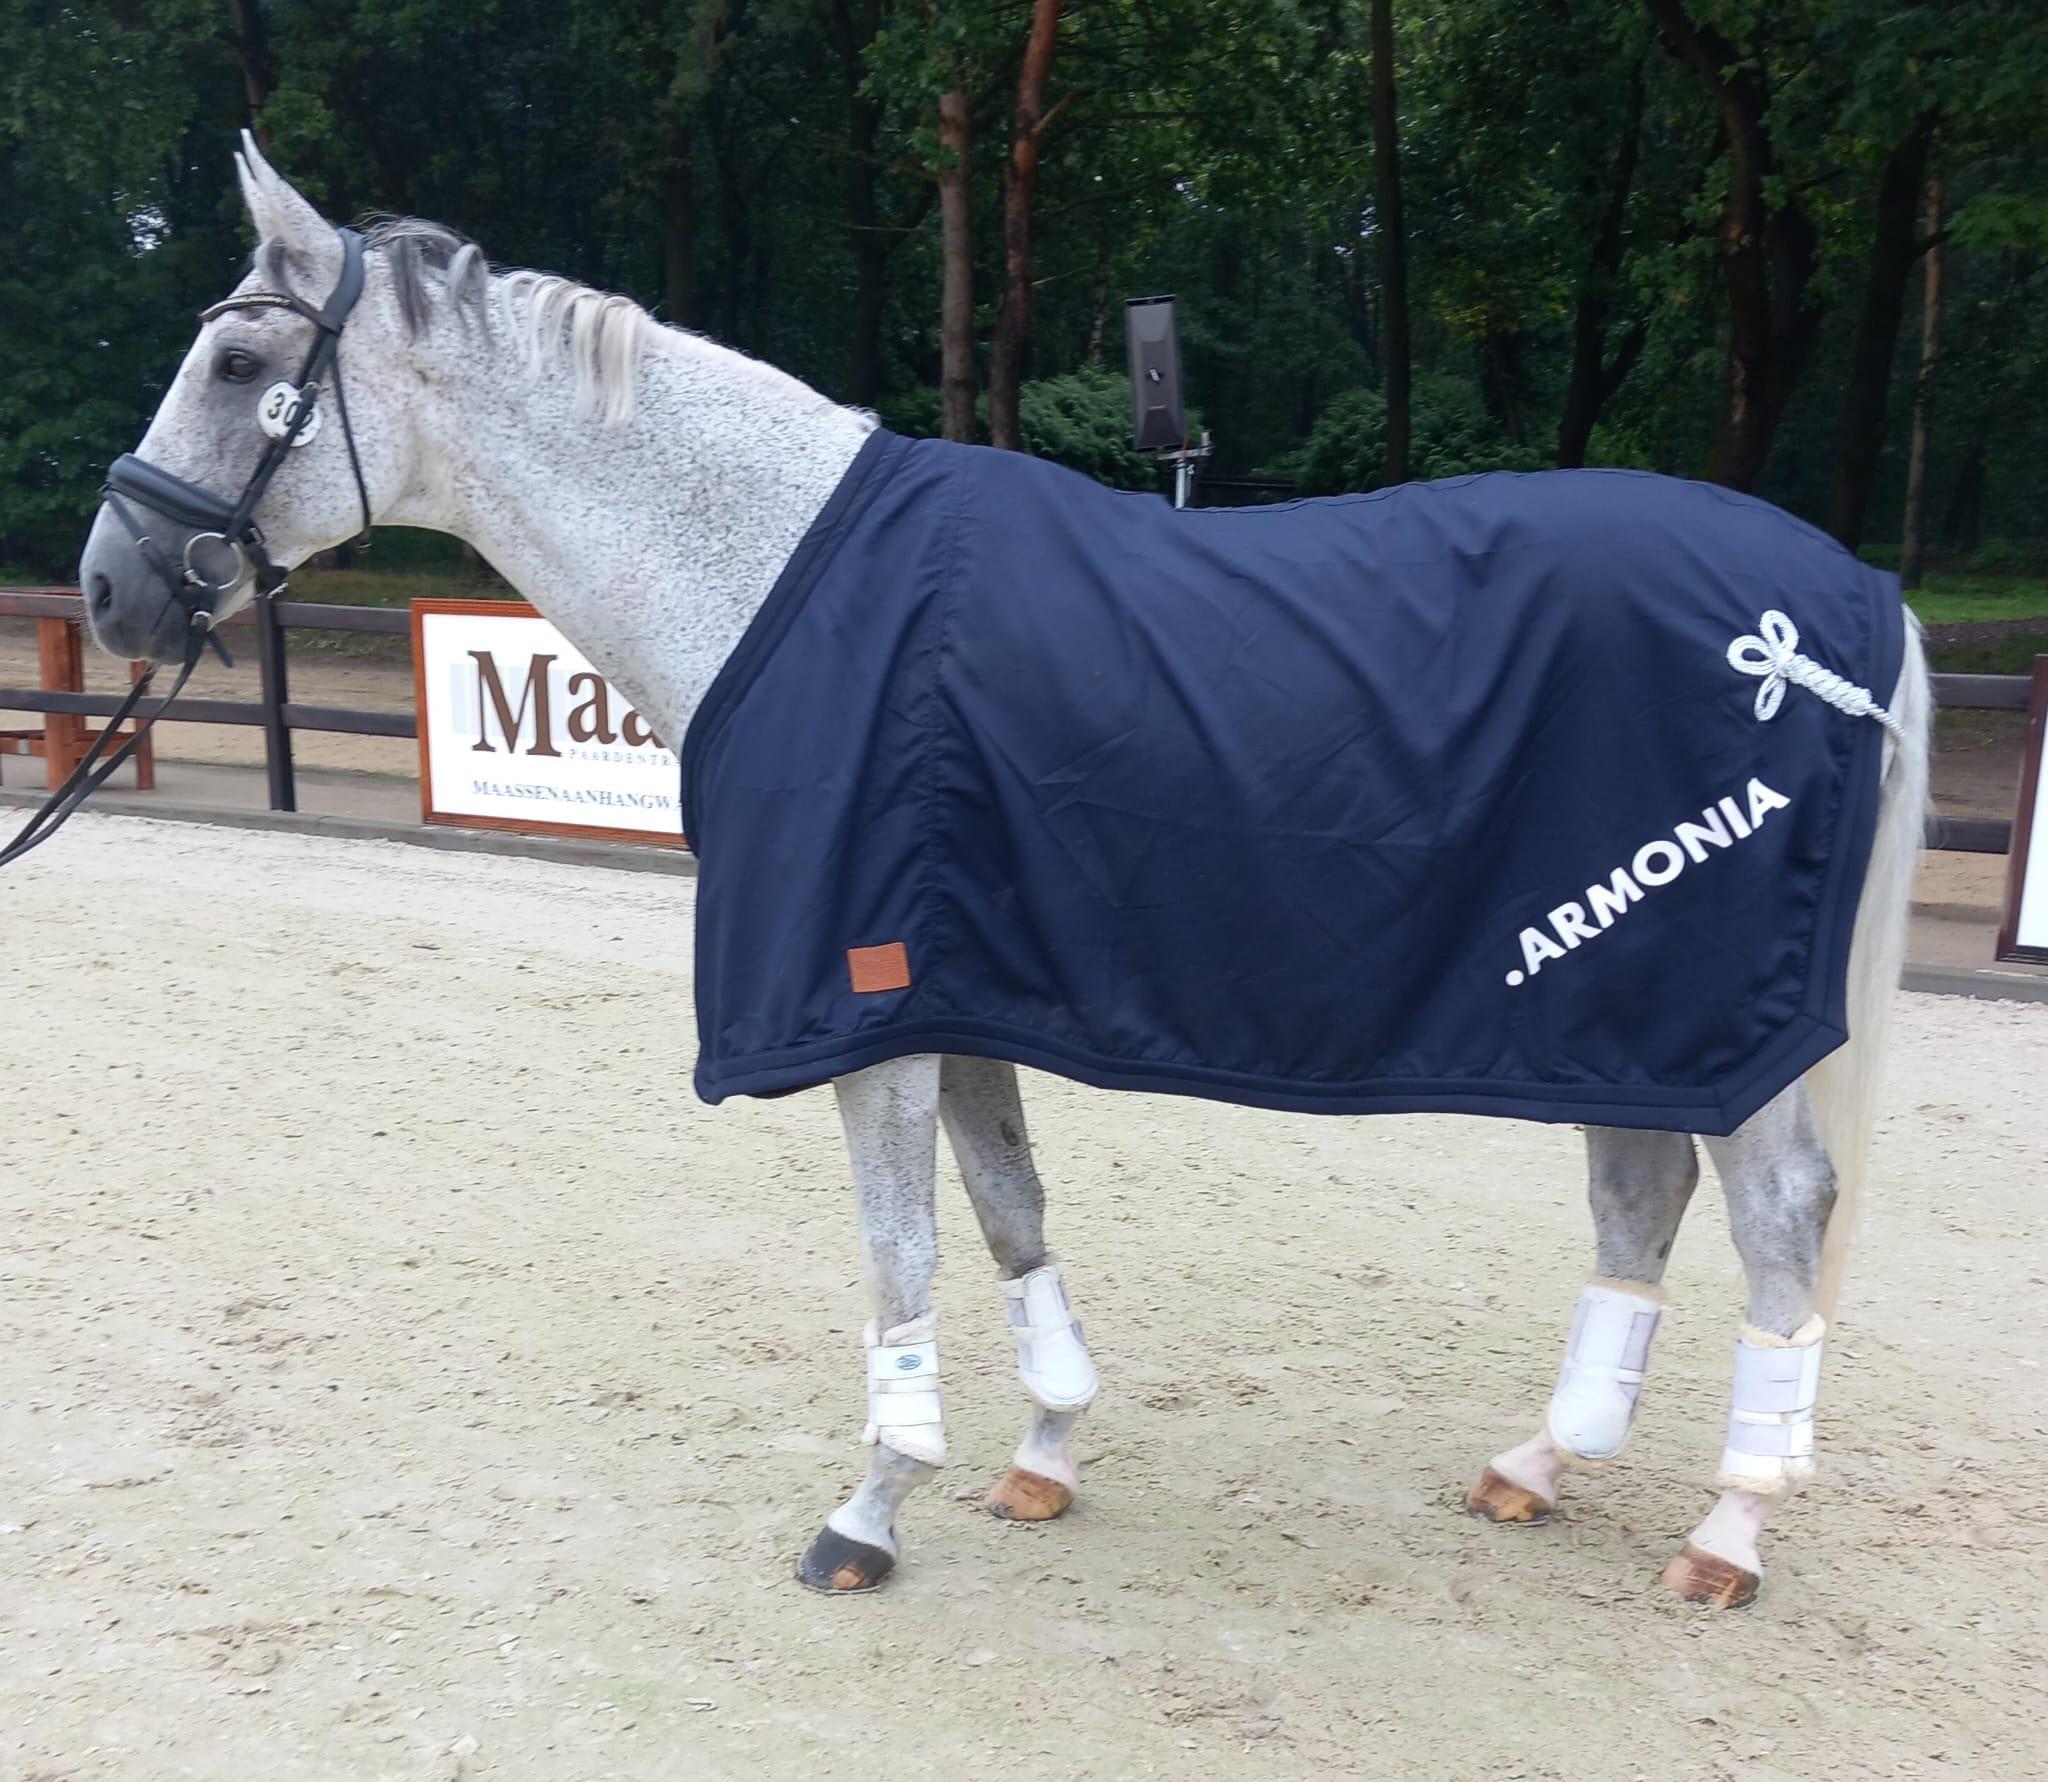 Para-equestrian competition for Adib El Sarakby in the Netherlands